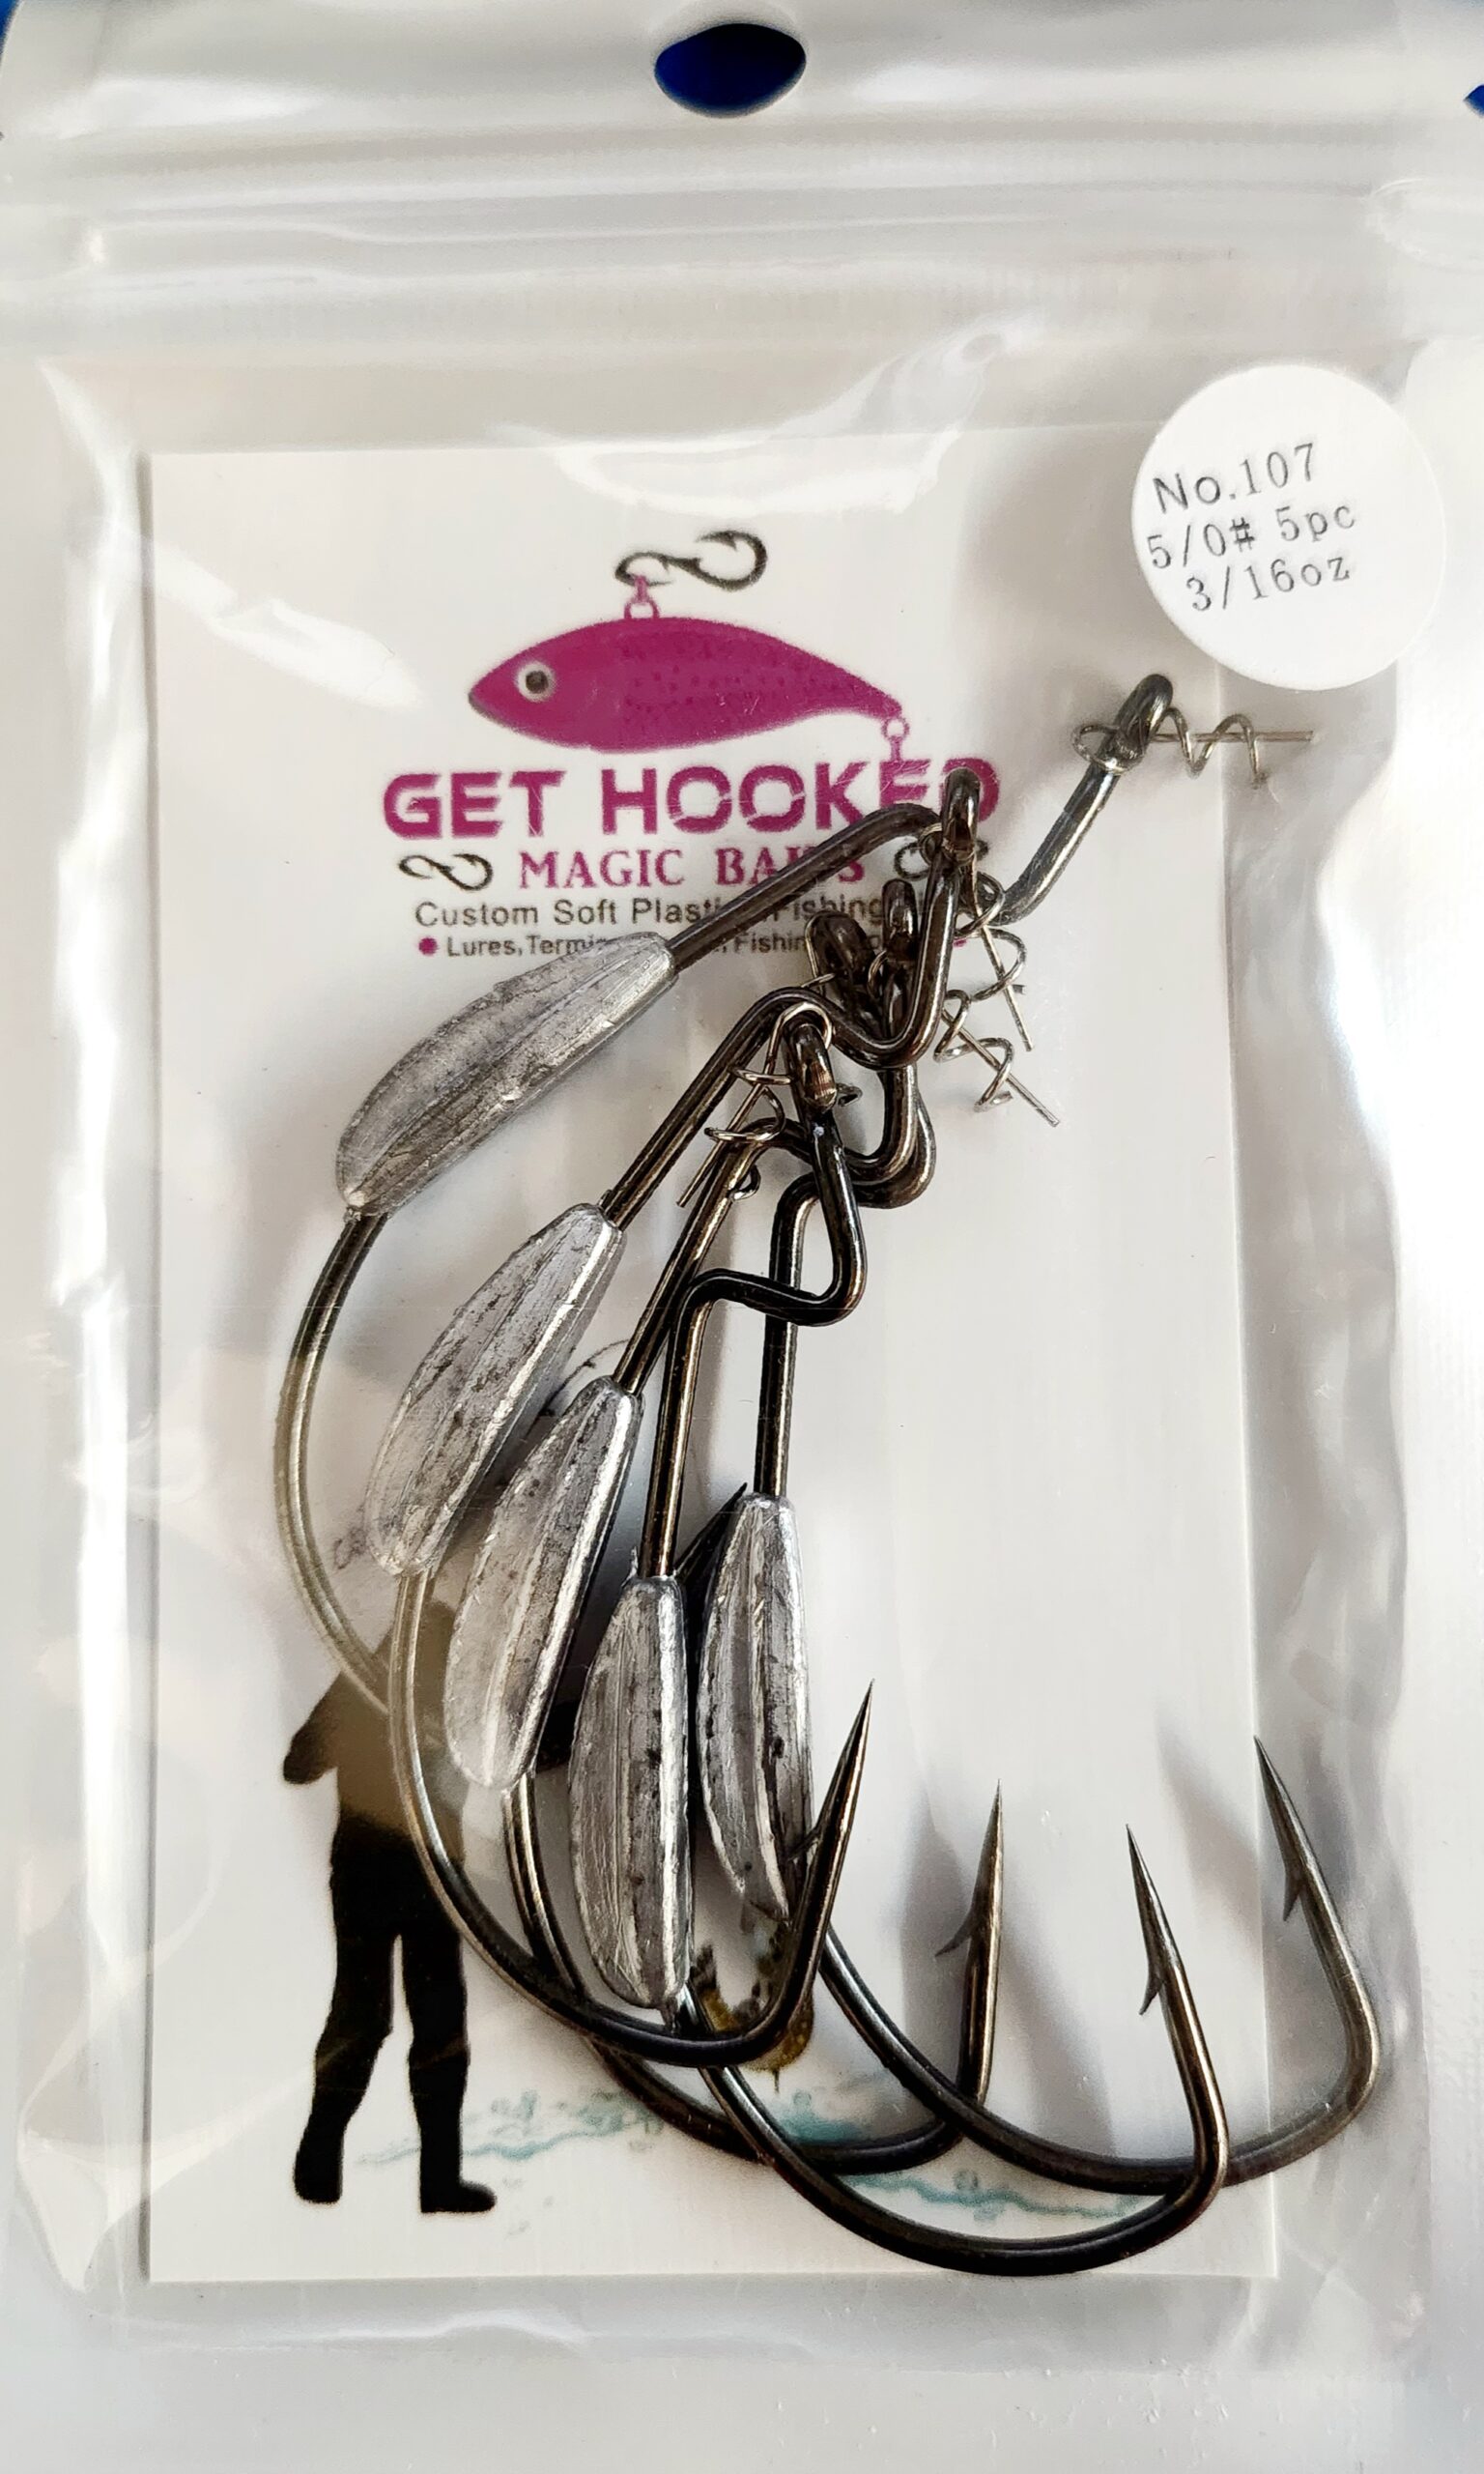 Weighted spring lock hooks - Get Hooked Magic Baits